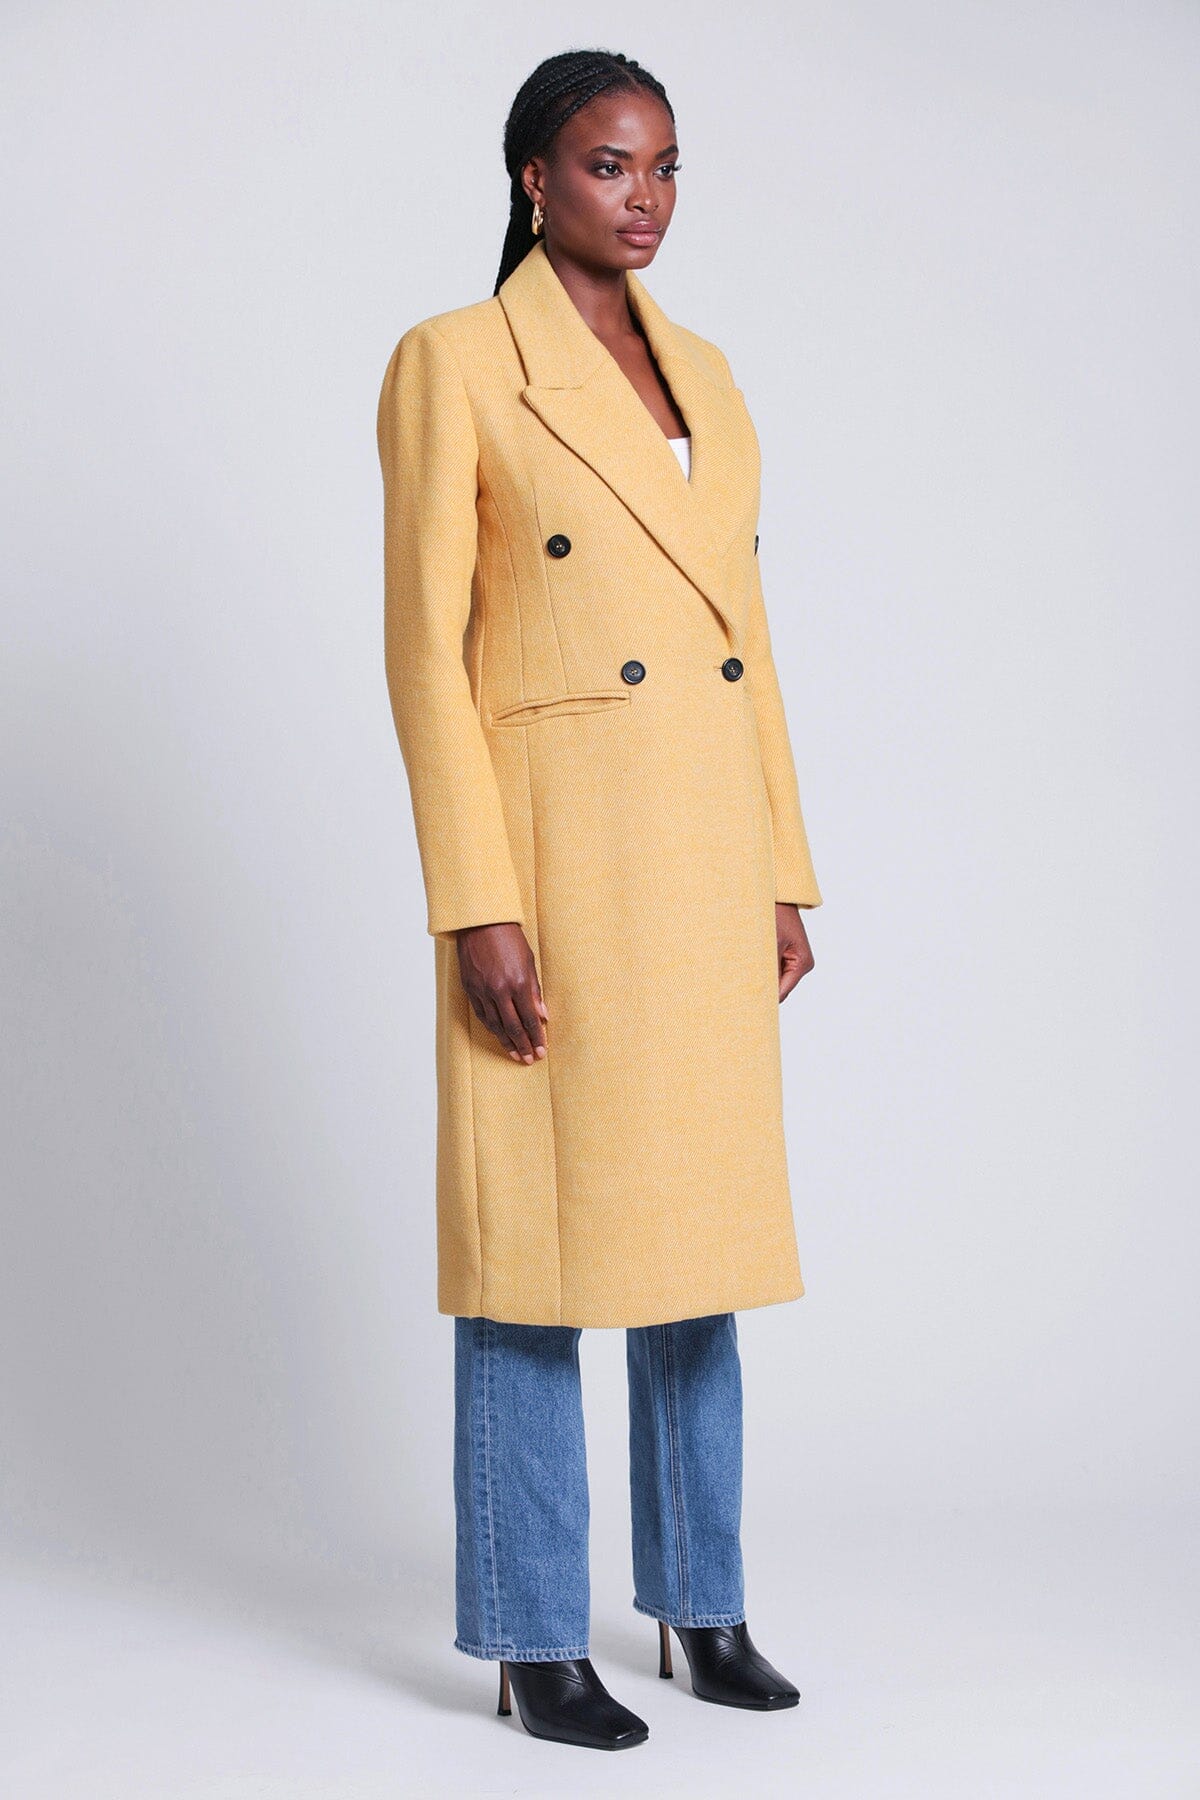 Mustard yellow tailored double-breasted long coat by Avec Les Filles Coats & Jackets